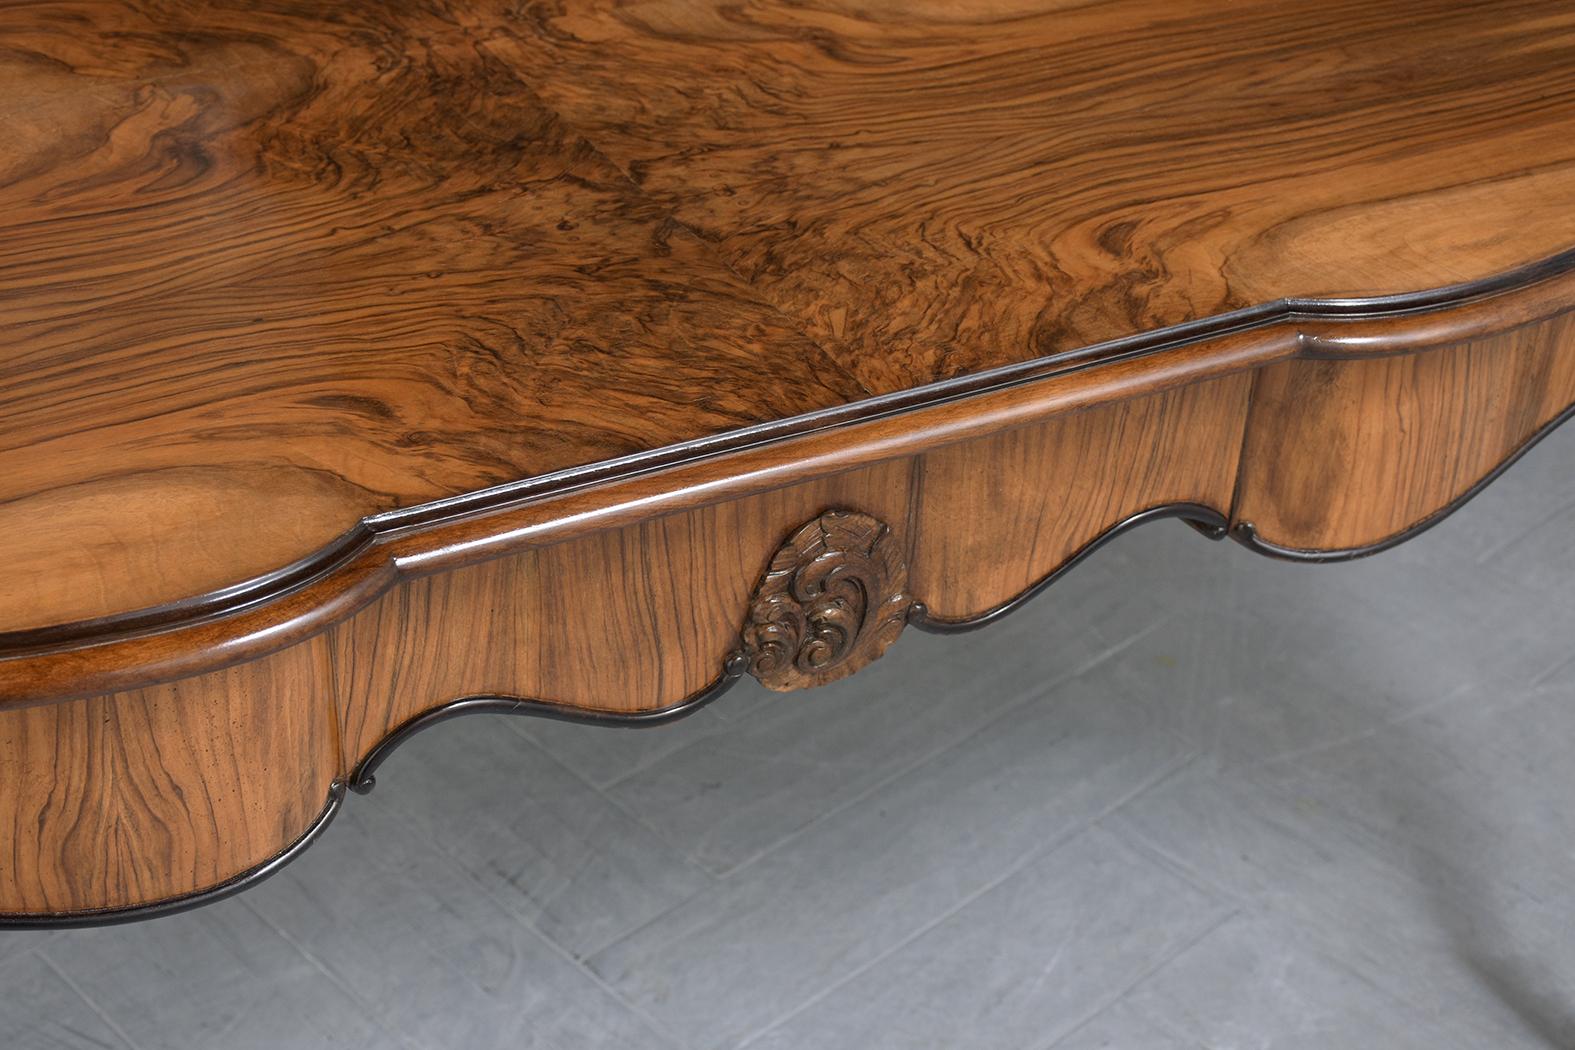 Lacquer Late 19th-Century English Walnut Dining Table with Carved Cabriole Legs